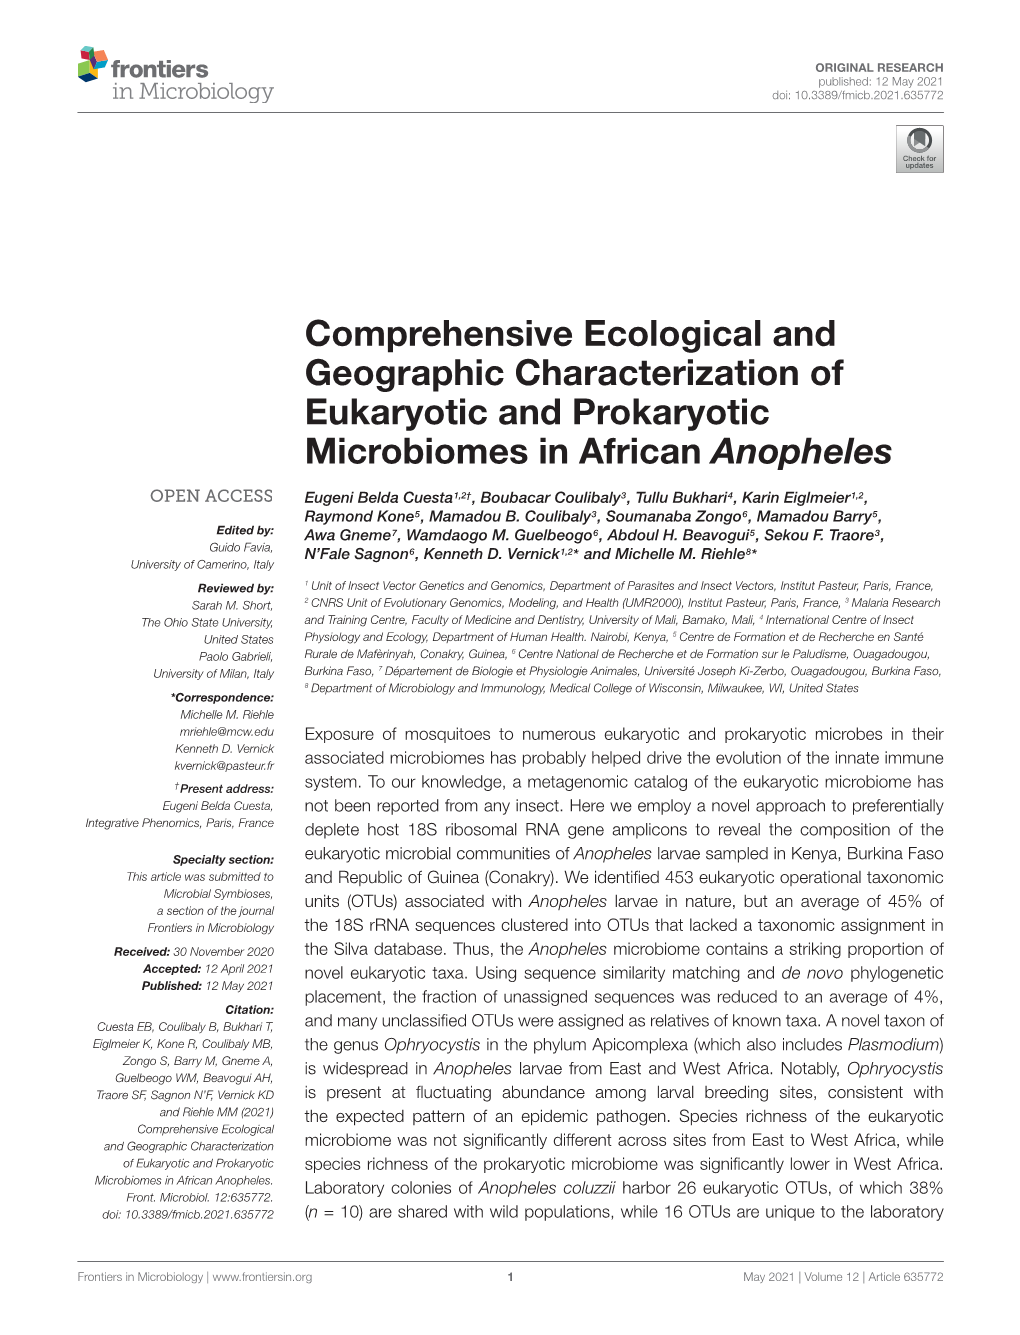 Comprehensive Ecological and Geographic Characterization of Eukaryotic and Prokaryotic Microbiomes in African Anopheles